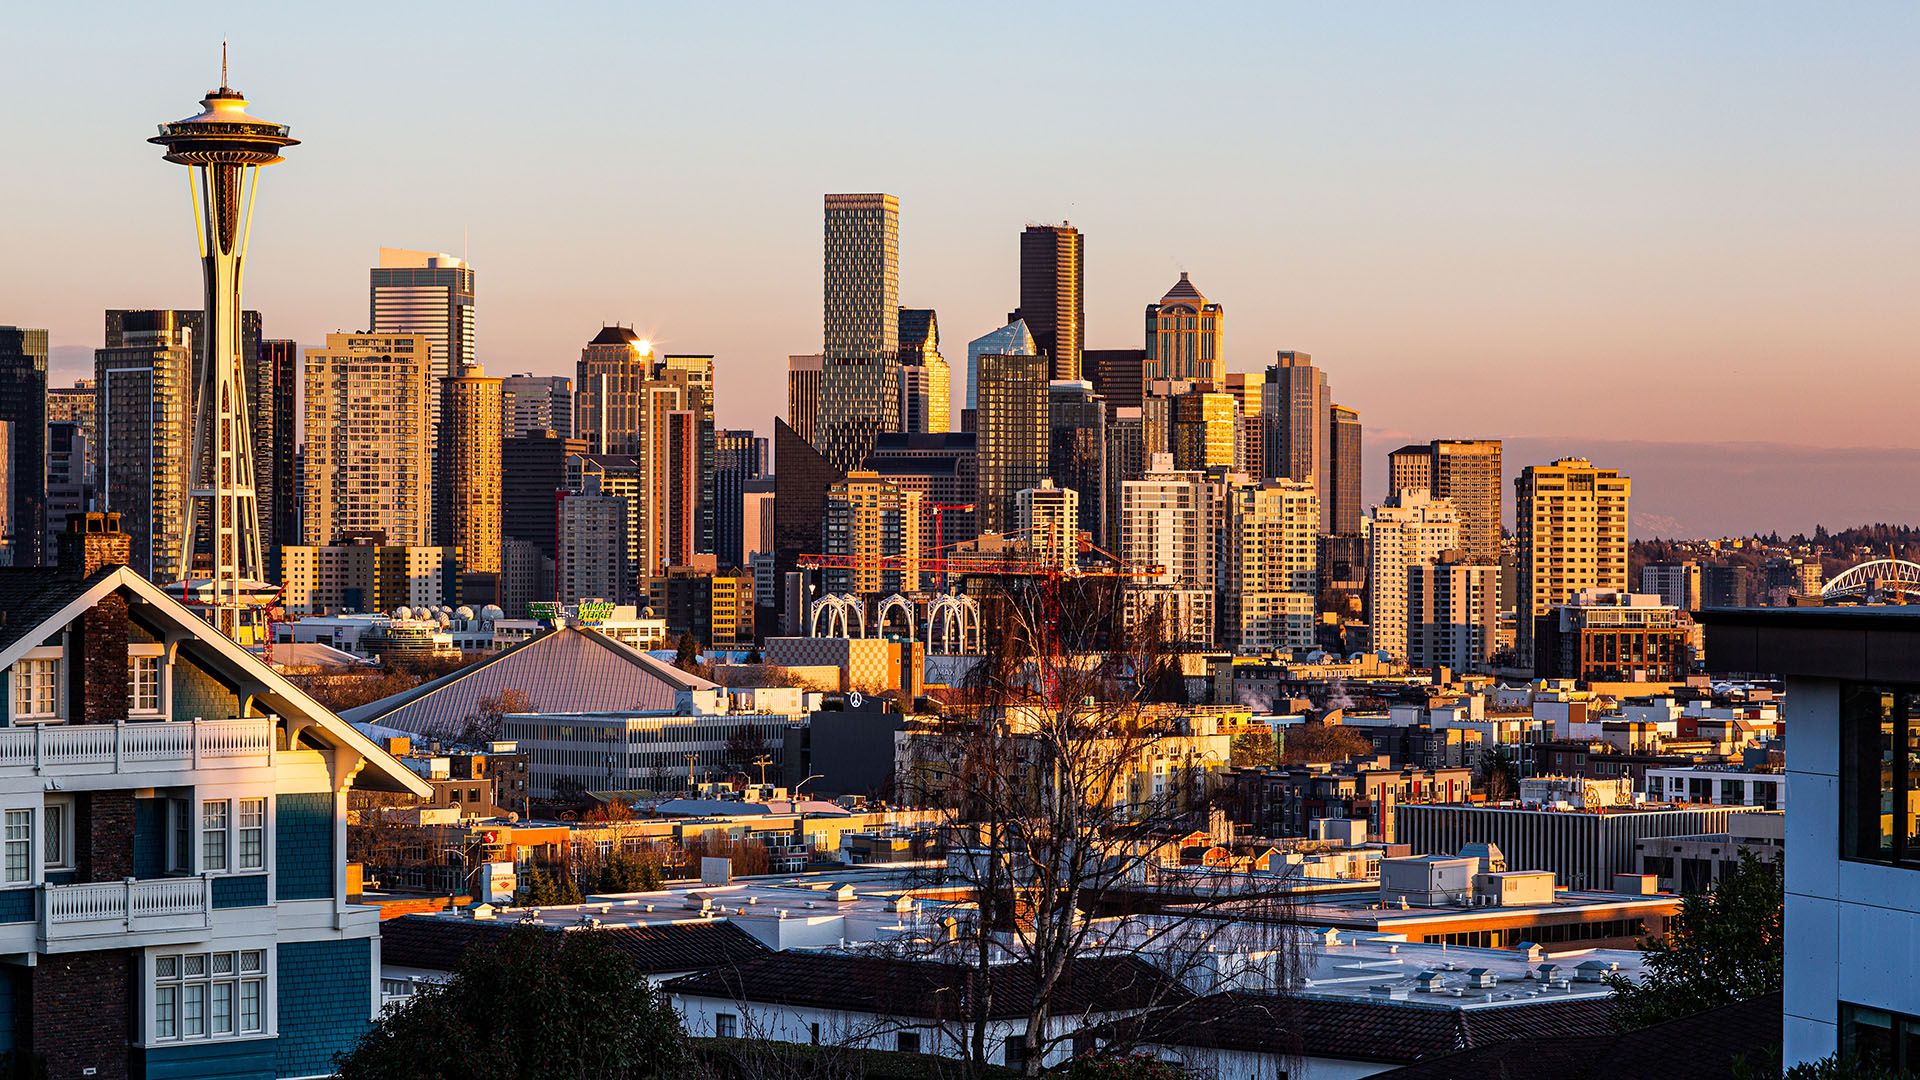 The Space Needle and downtown Seattle bathed in golden light at sunset.